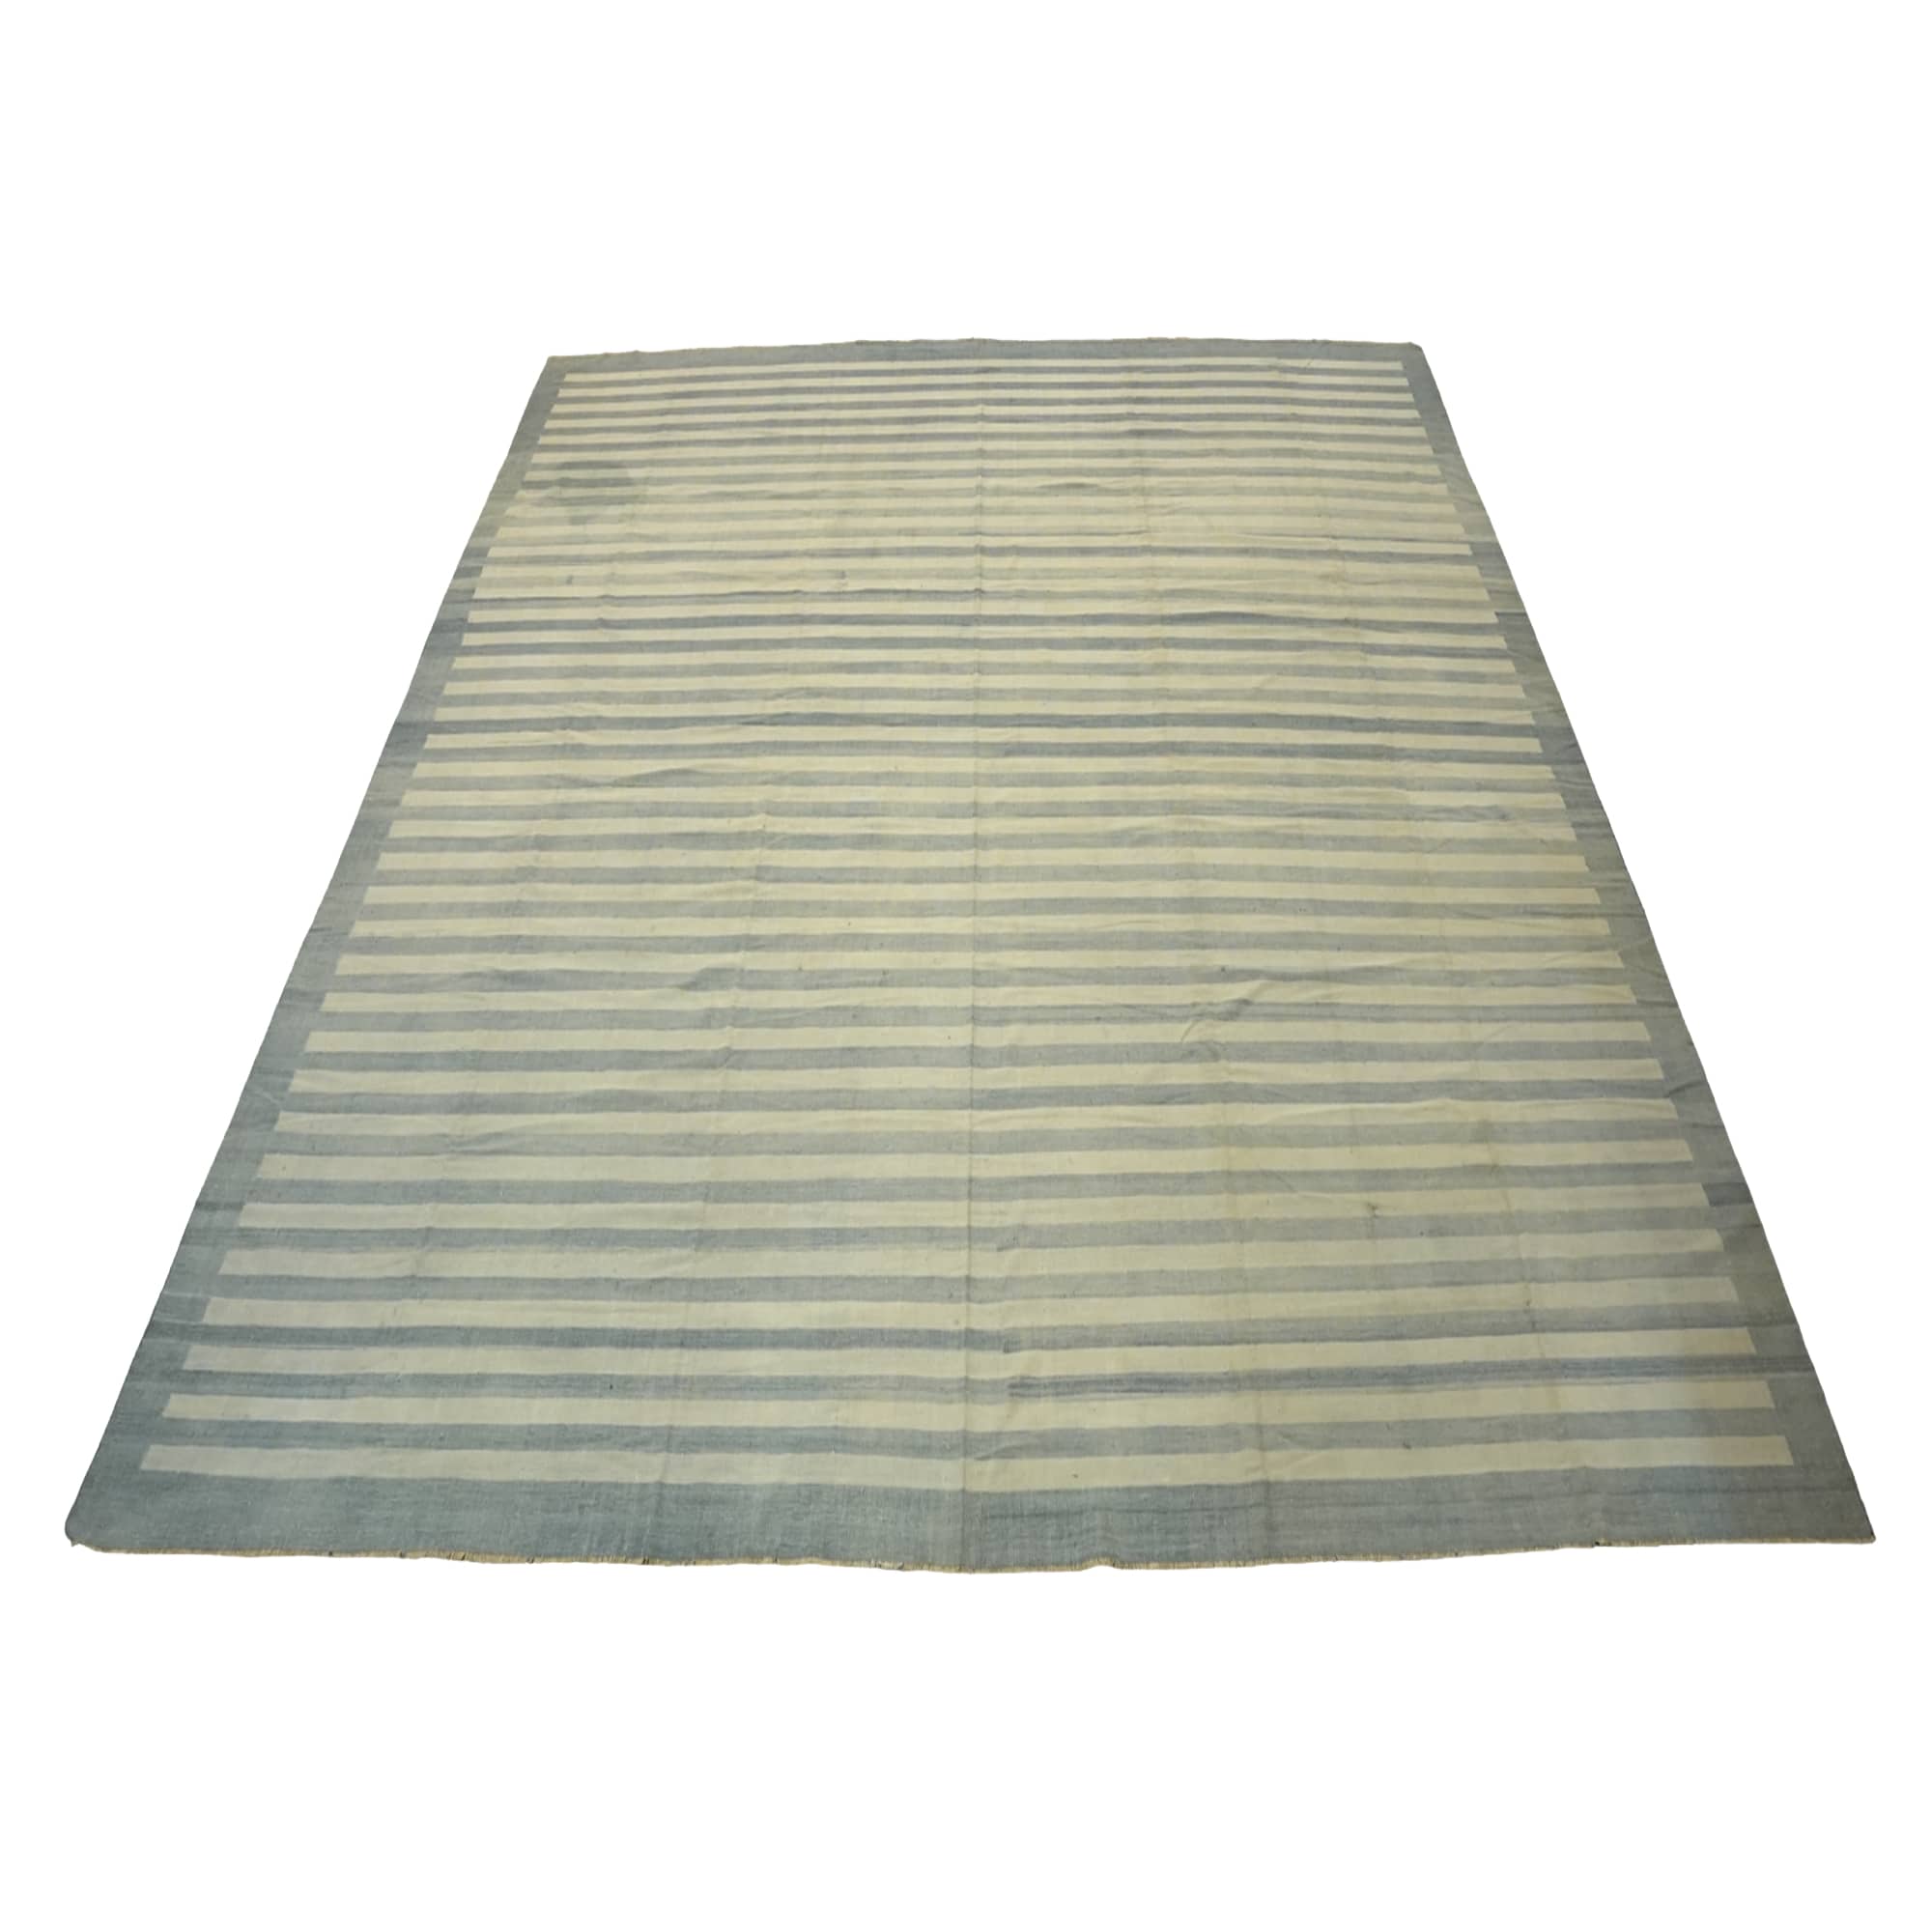 Vintage Dhurrie Rug in Bluewith Stripes, from Rug & Kilim For Sale